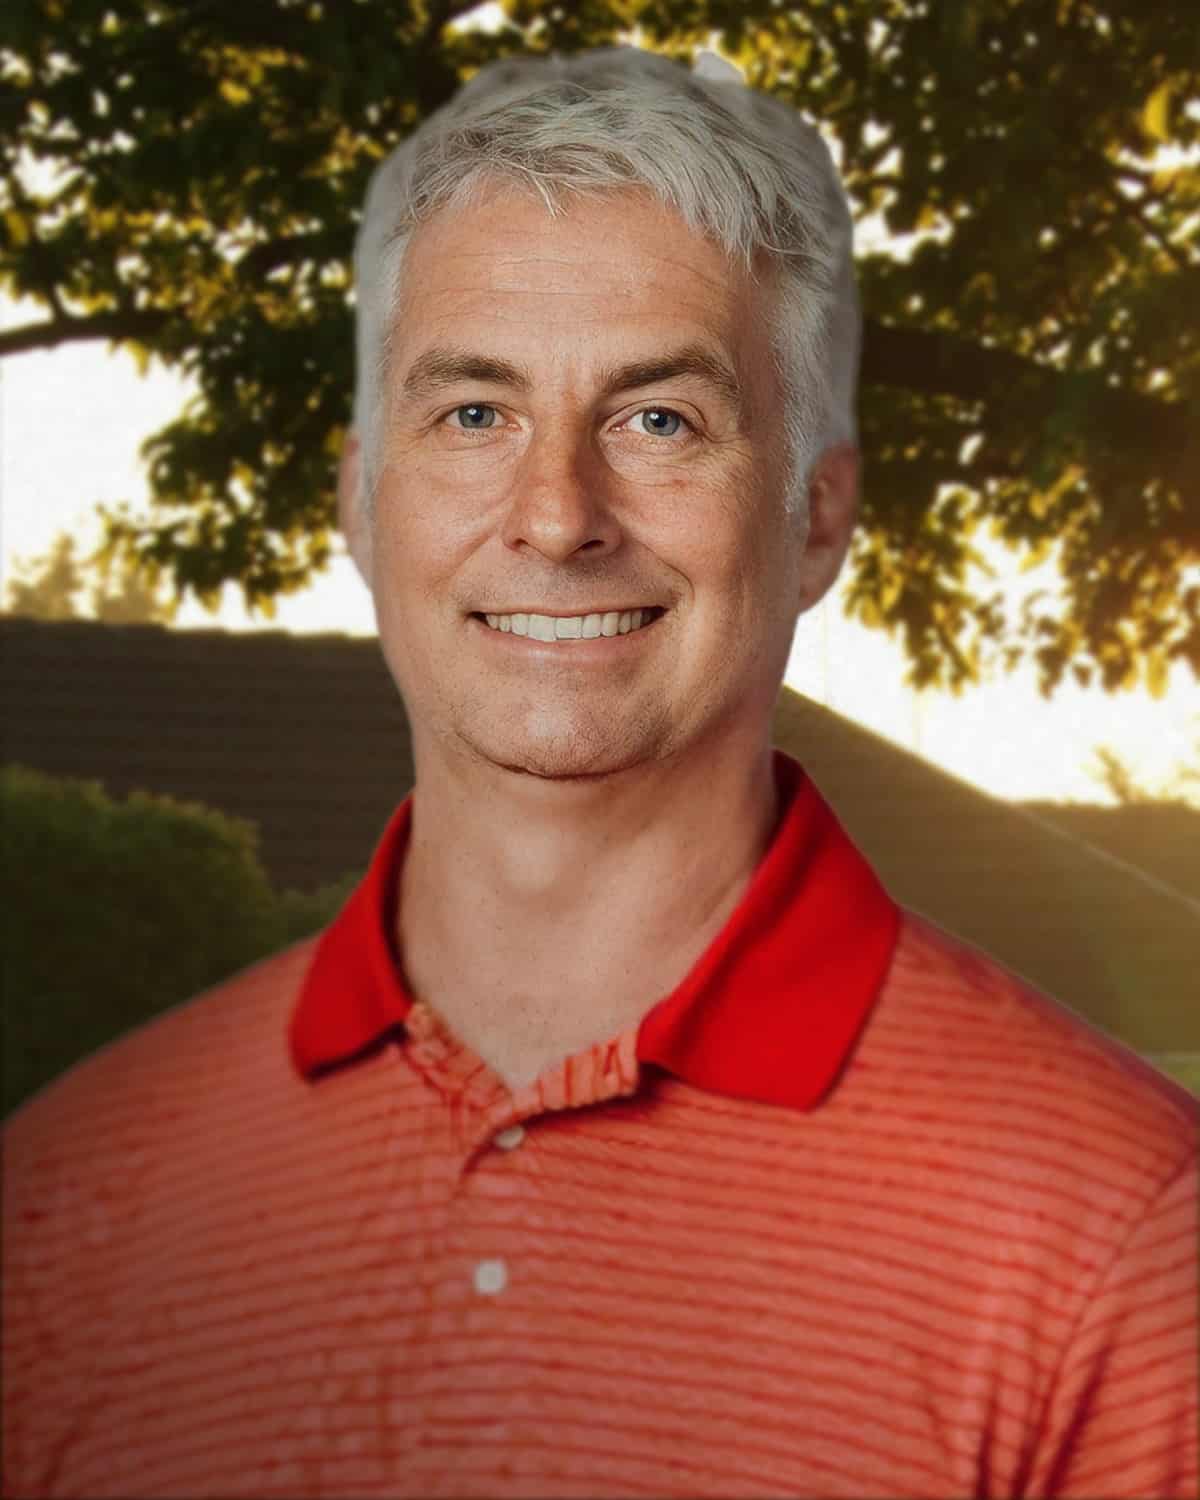 A portrait of a smiling man with short, gray hair wearing a red collared shirt with a striped pattern. The background features a softly focused outdoor scene with trees and warm, golden light filtering through the leaves, suggesting a pleasant evening setting.